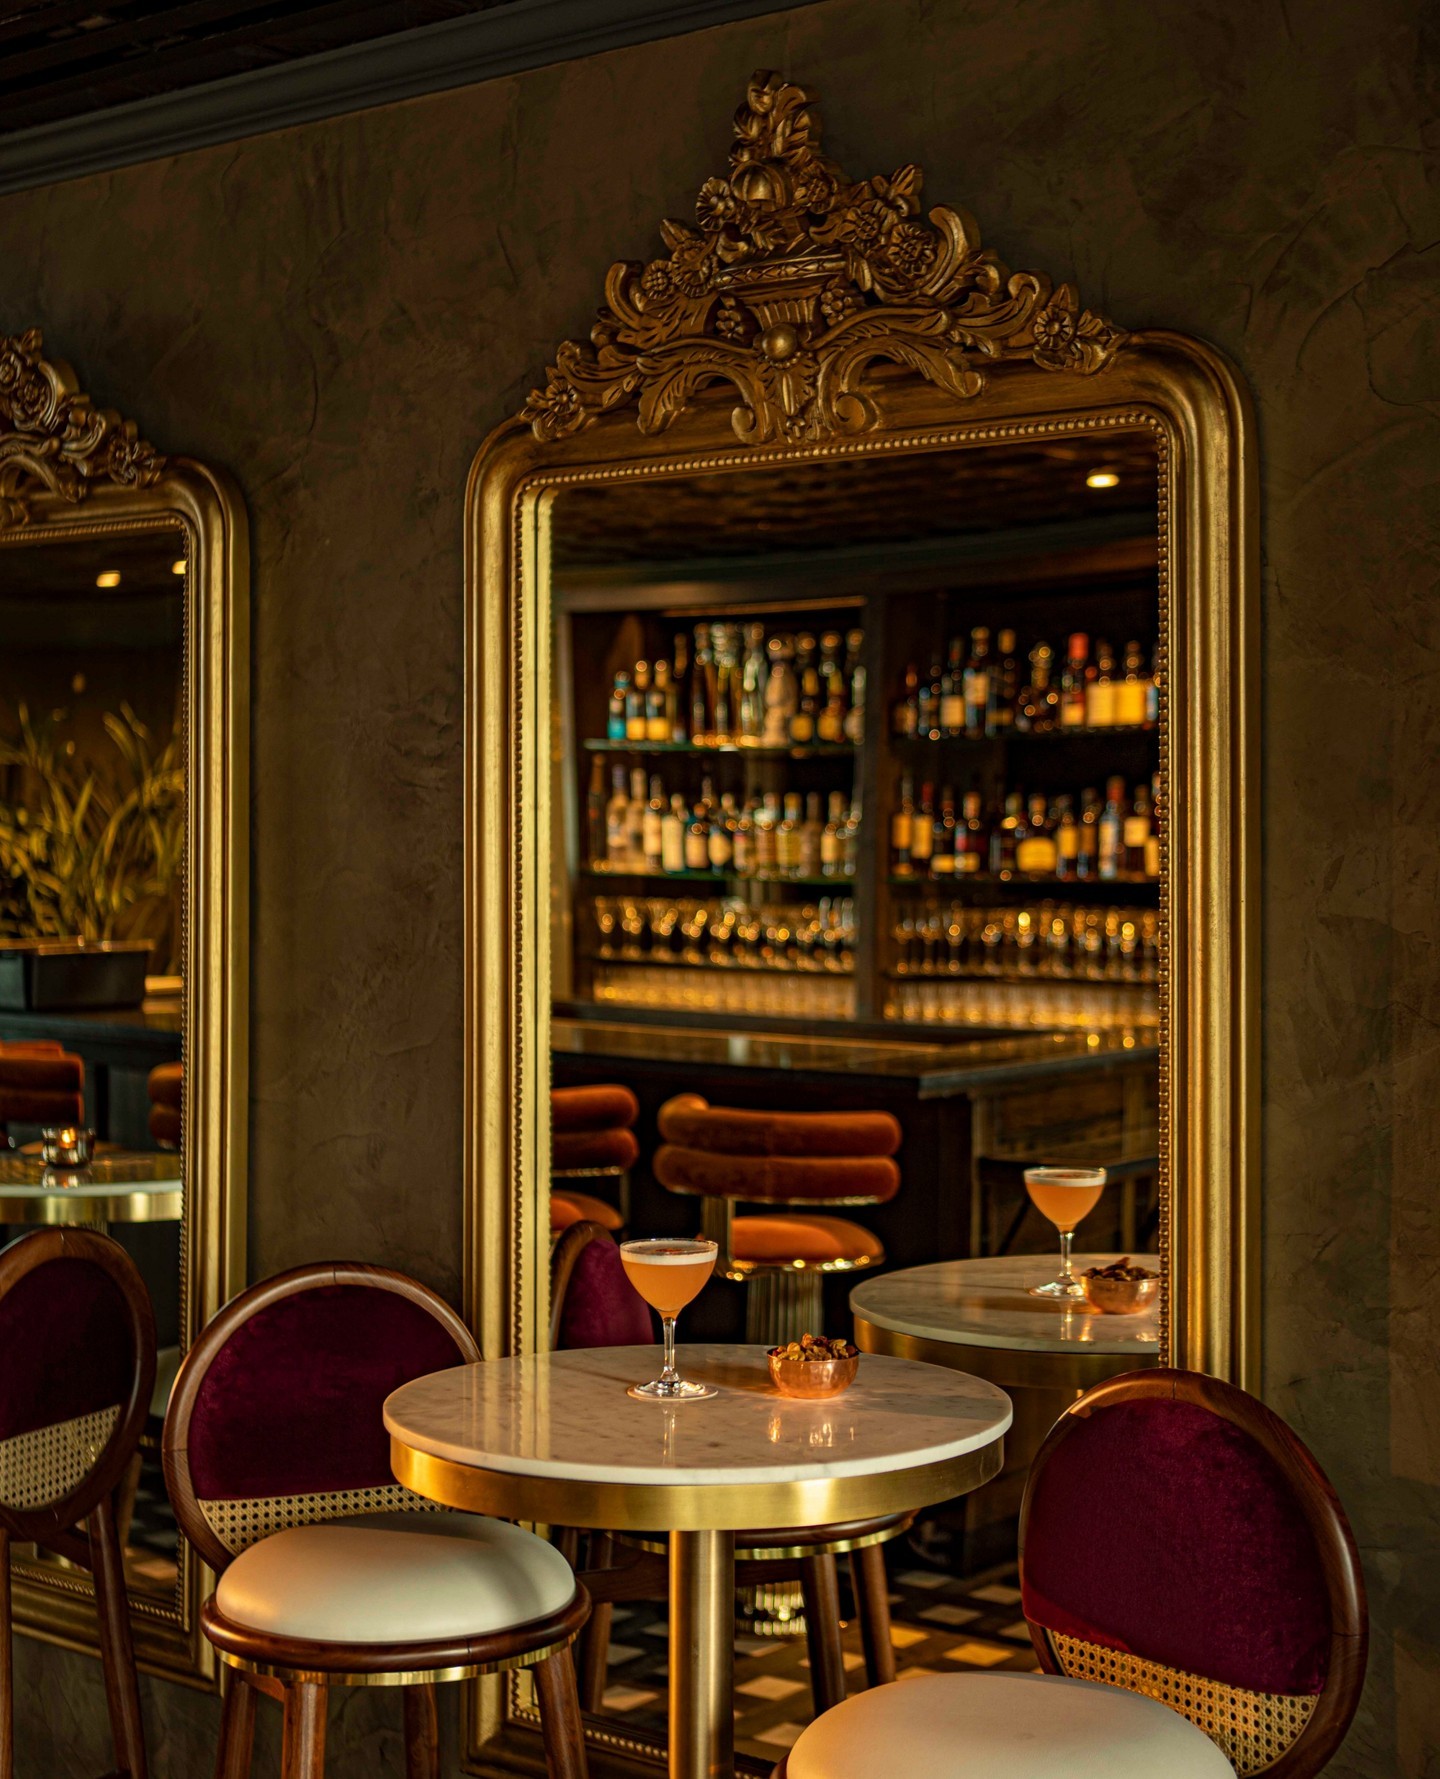 Clandestine corners are our preference.  Meet your darling here for a drink.